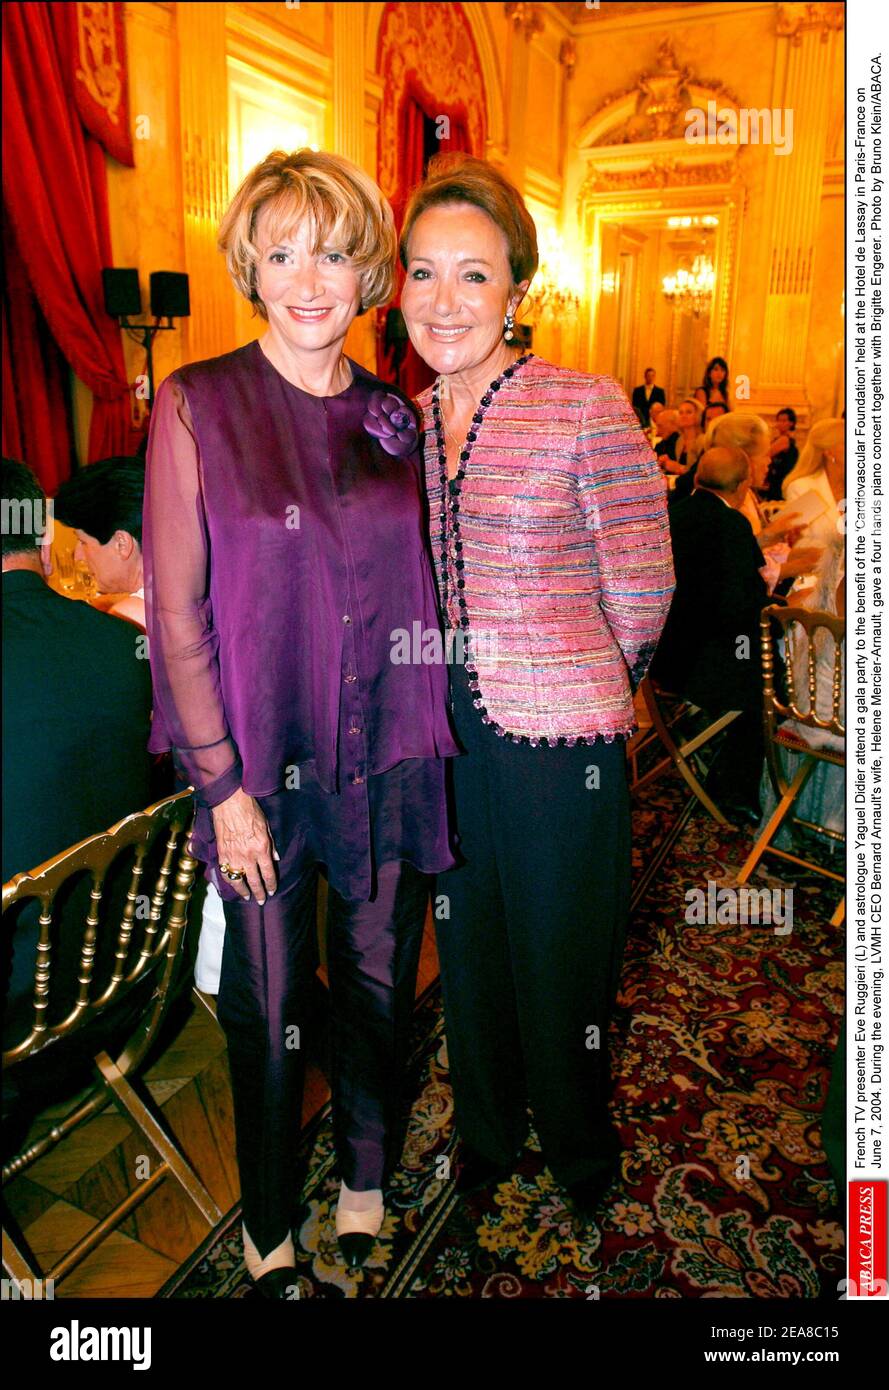 French TV presenter Eve Ruggieri (L) and astrologue Yaguel Didier attend a gala party to the benefit of the 'Cardiovascular Foundation' held at the Hotel de Lassay in Paris-France on June 7, 2004. During the evening, LVMH CEO Bernard Arnault's wife, Helene Mercier-Arnault, gave a four hands piano concert together with Brigitte Engerer. Photo by Bruno Klein/ABACA. Stock Photo